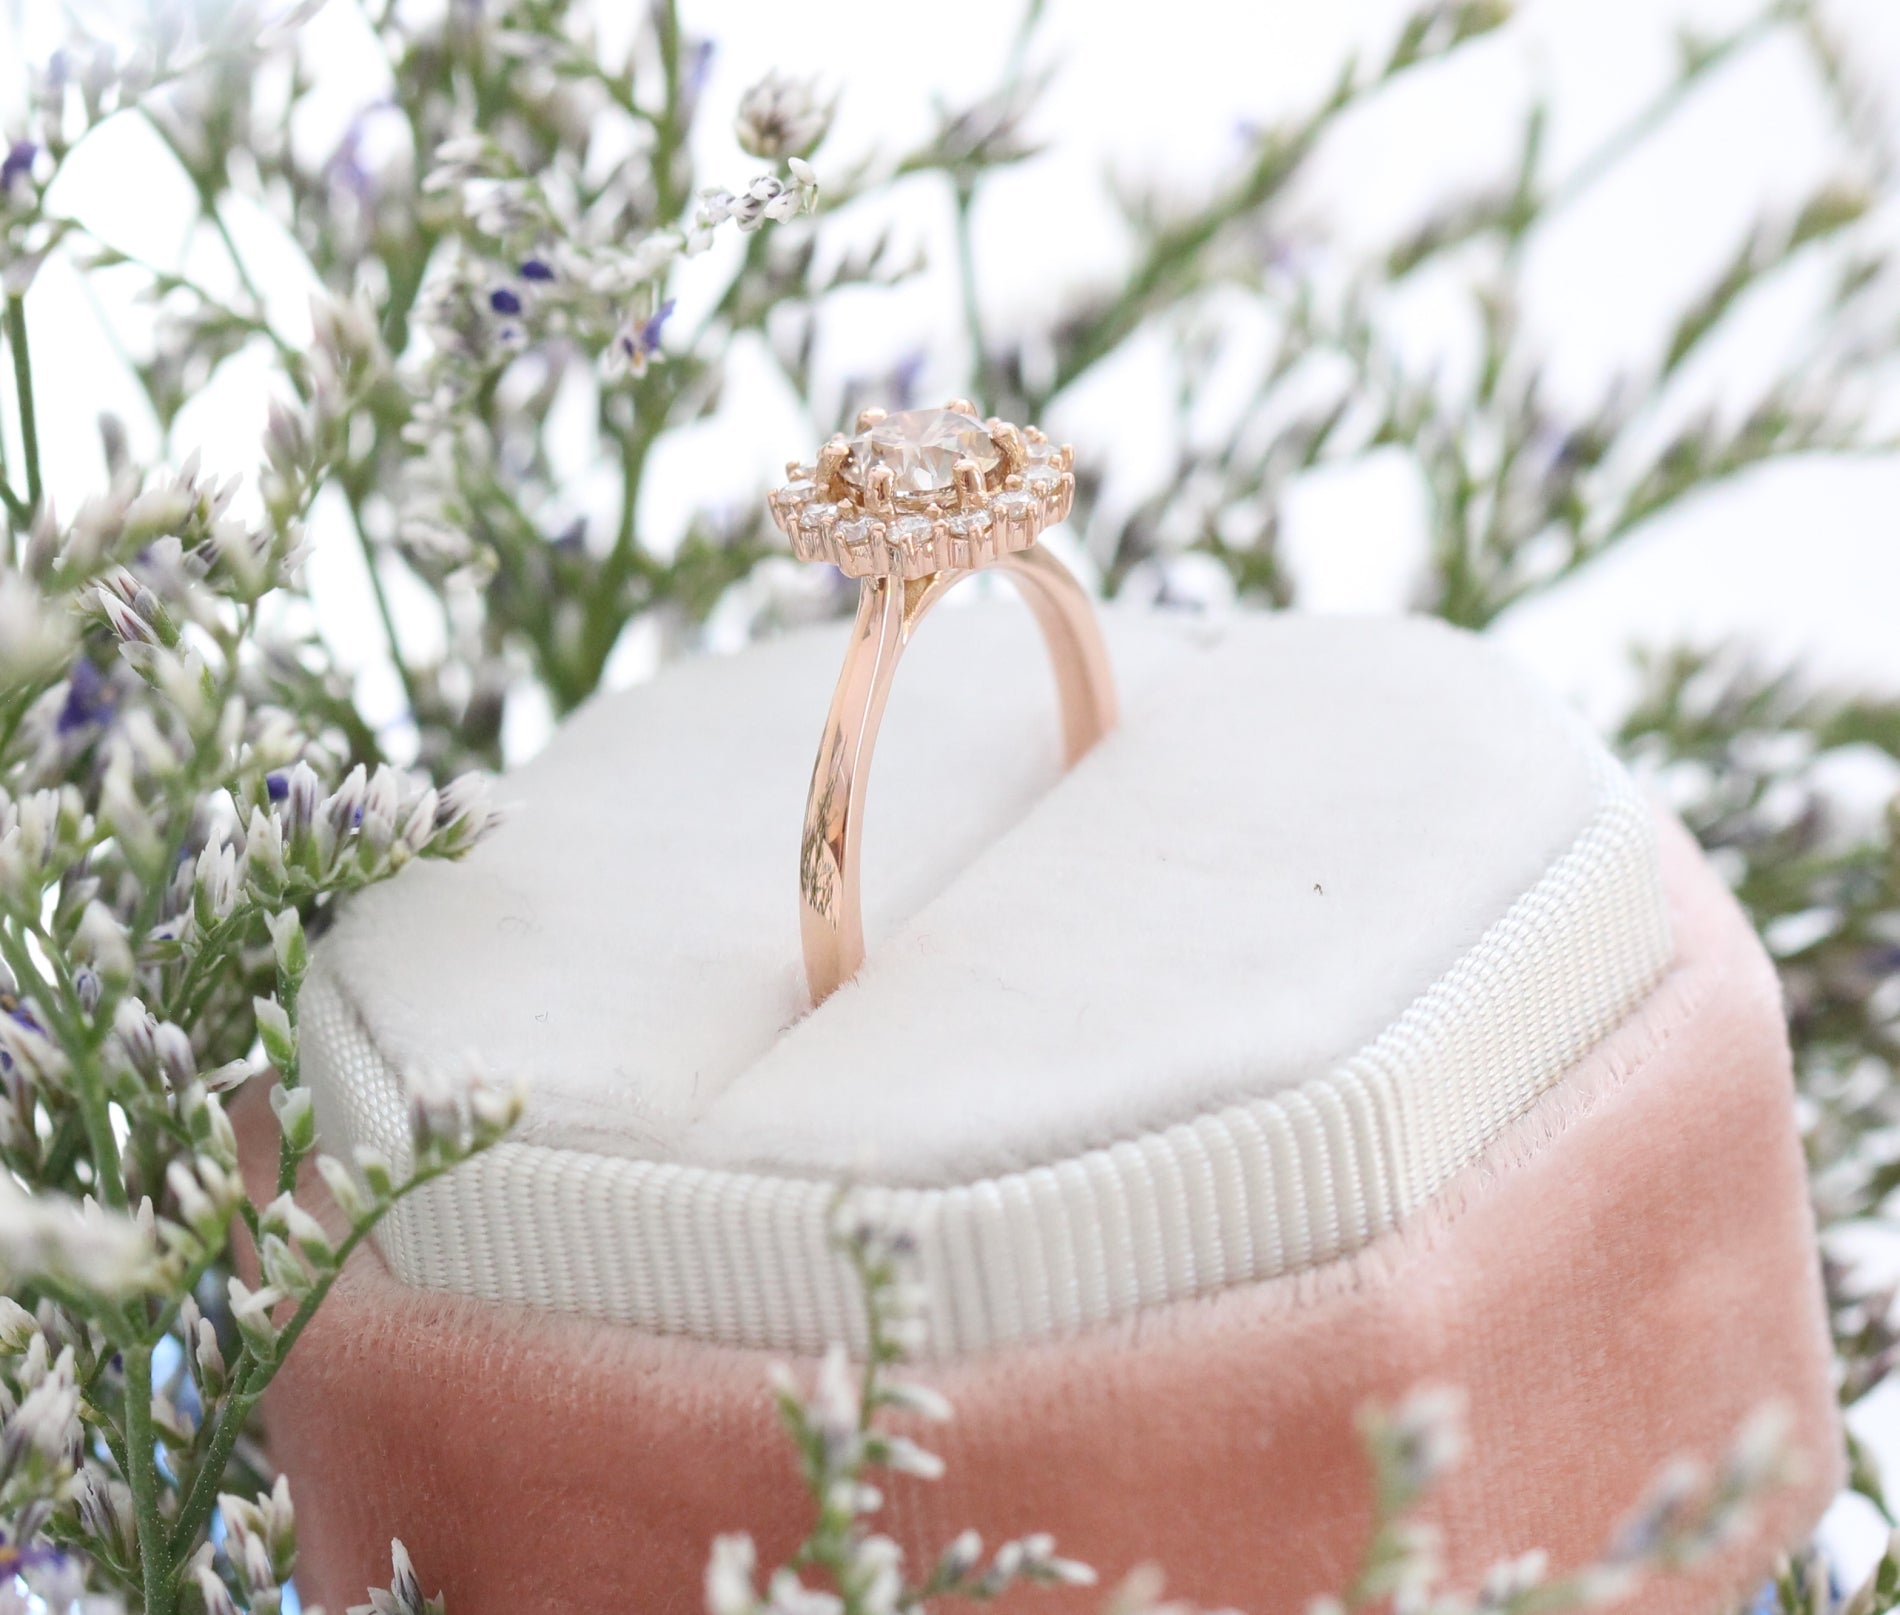 Champagne Diamond Engagement Ring in Rose Gold Cluster Diamond Ring by La More Design Jewelry